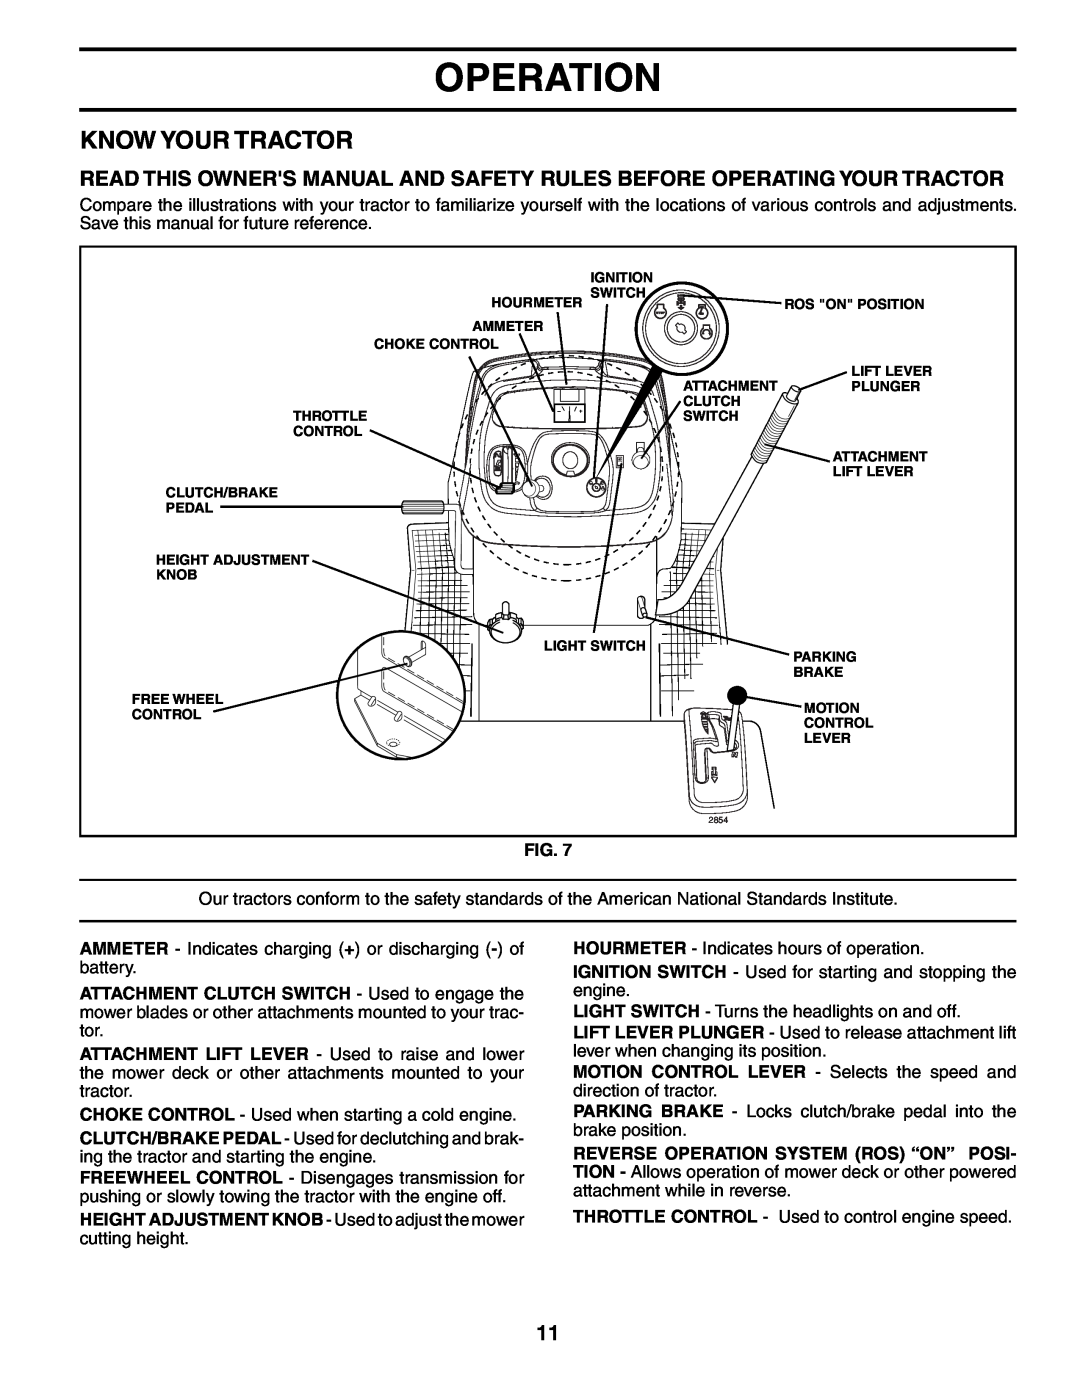 Poulan DB24H48YT manual Know Your Tractor, Operation 